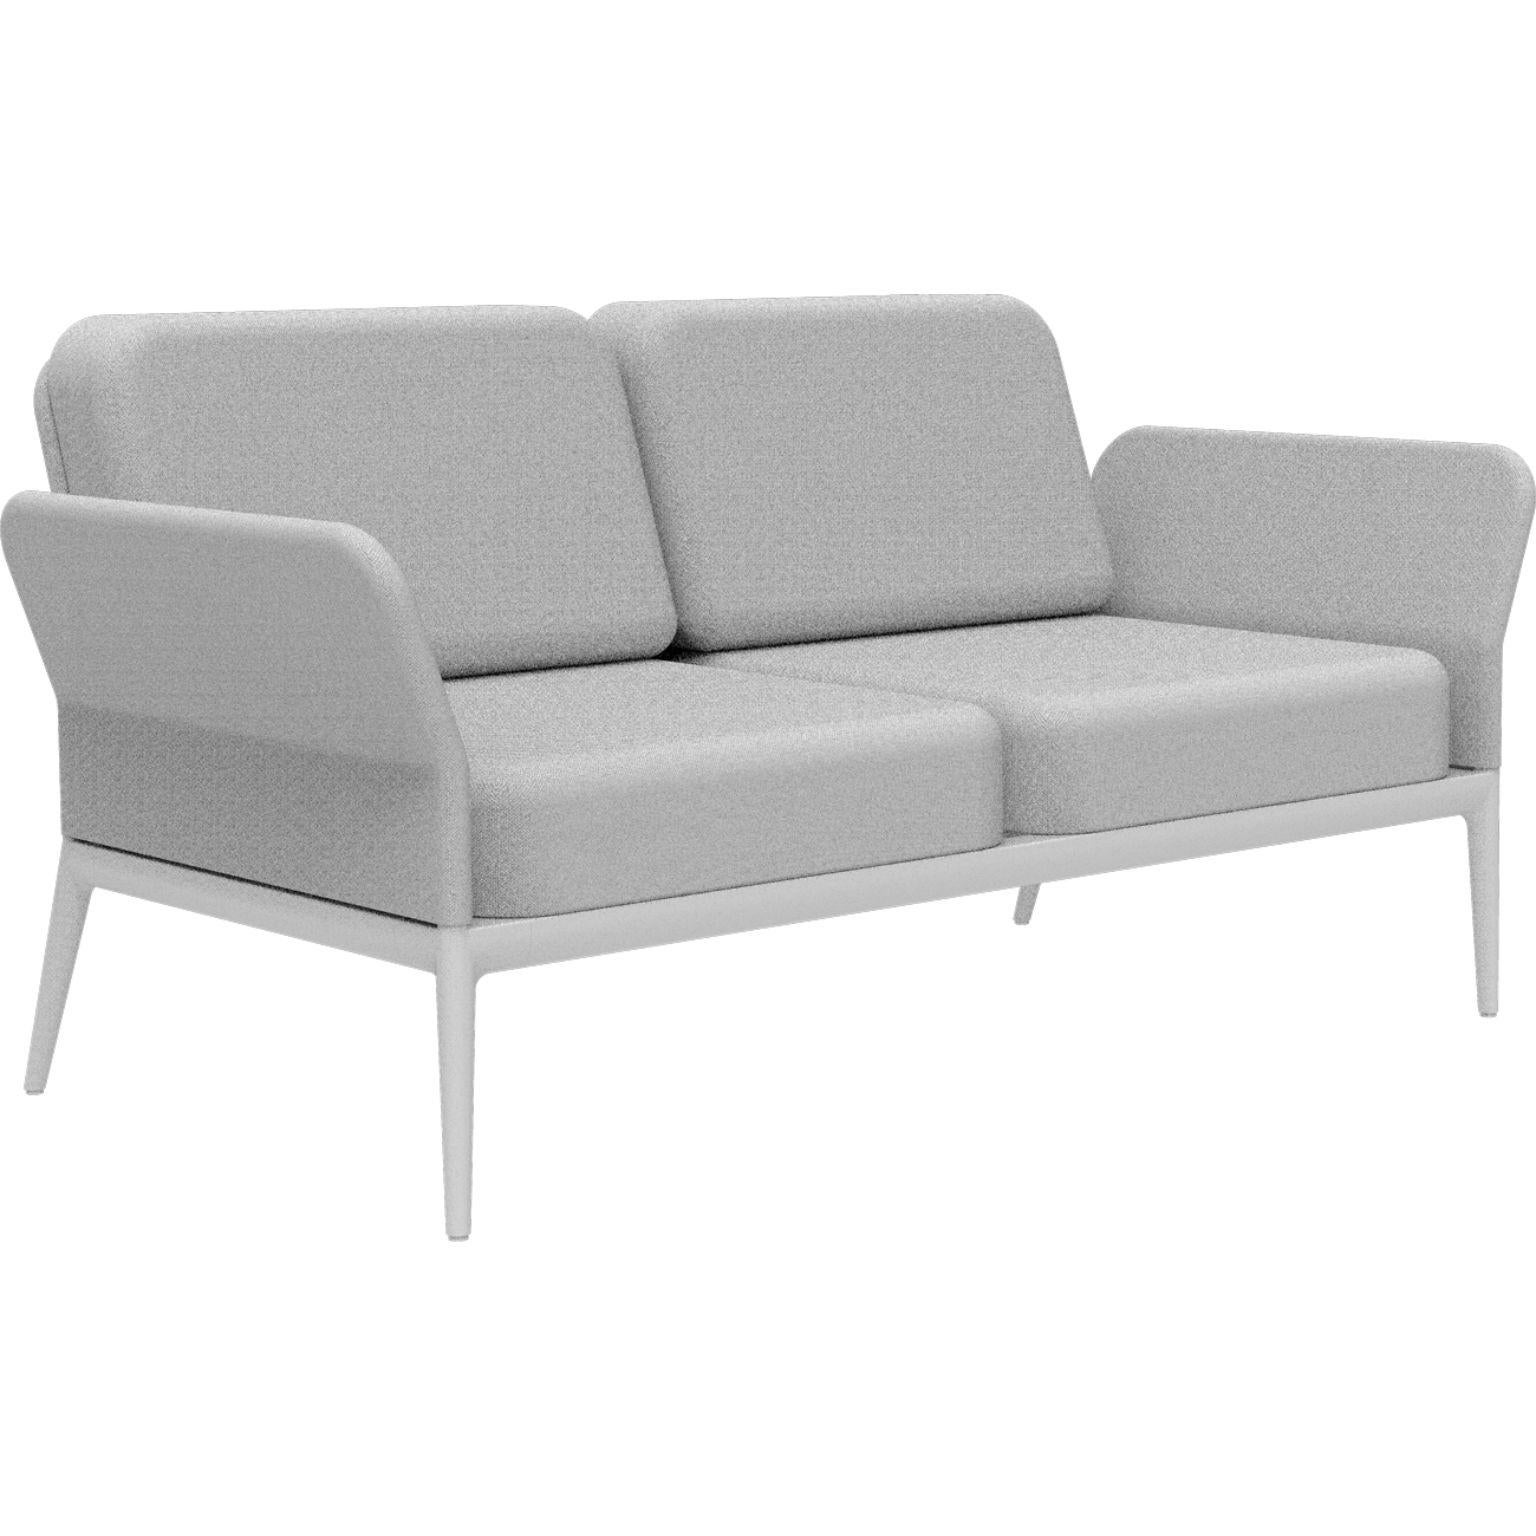 Cover white sofa by MOWEE
Dimensions: D83 x W160 x H81 cm (seat height 42 cm).
Material: Aluminum and upholstery.
Weight: 32 kg.
Also available in different colors and finishes. 

An unmistakable collection for its beauty and robustness. A